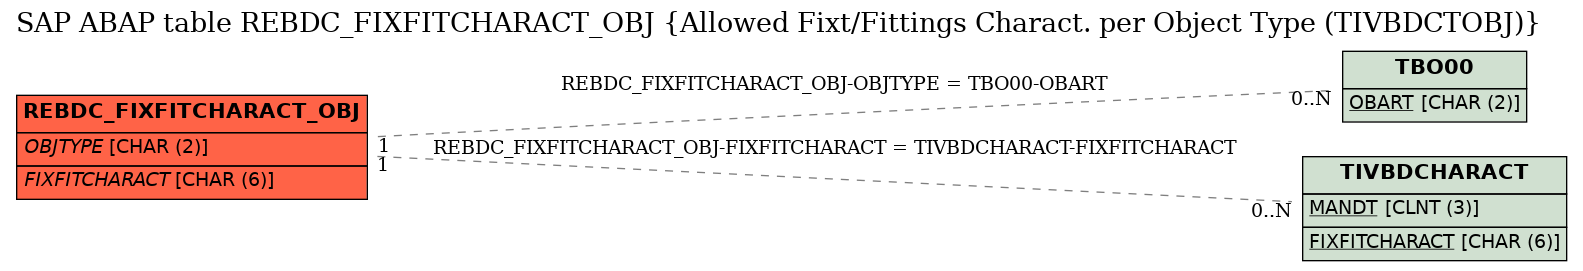 E-R Diagram for table REBDC_FIXFITCHARACT_OBJ (Allowed Fixt/Fittings Charact. per Object Type (TIVBDCTOBJ))